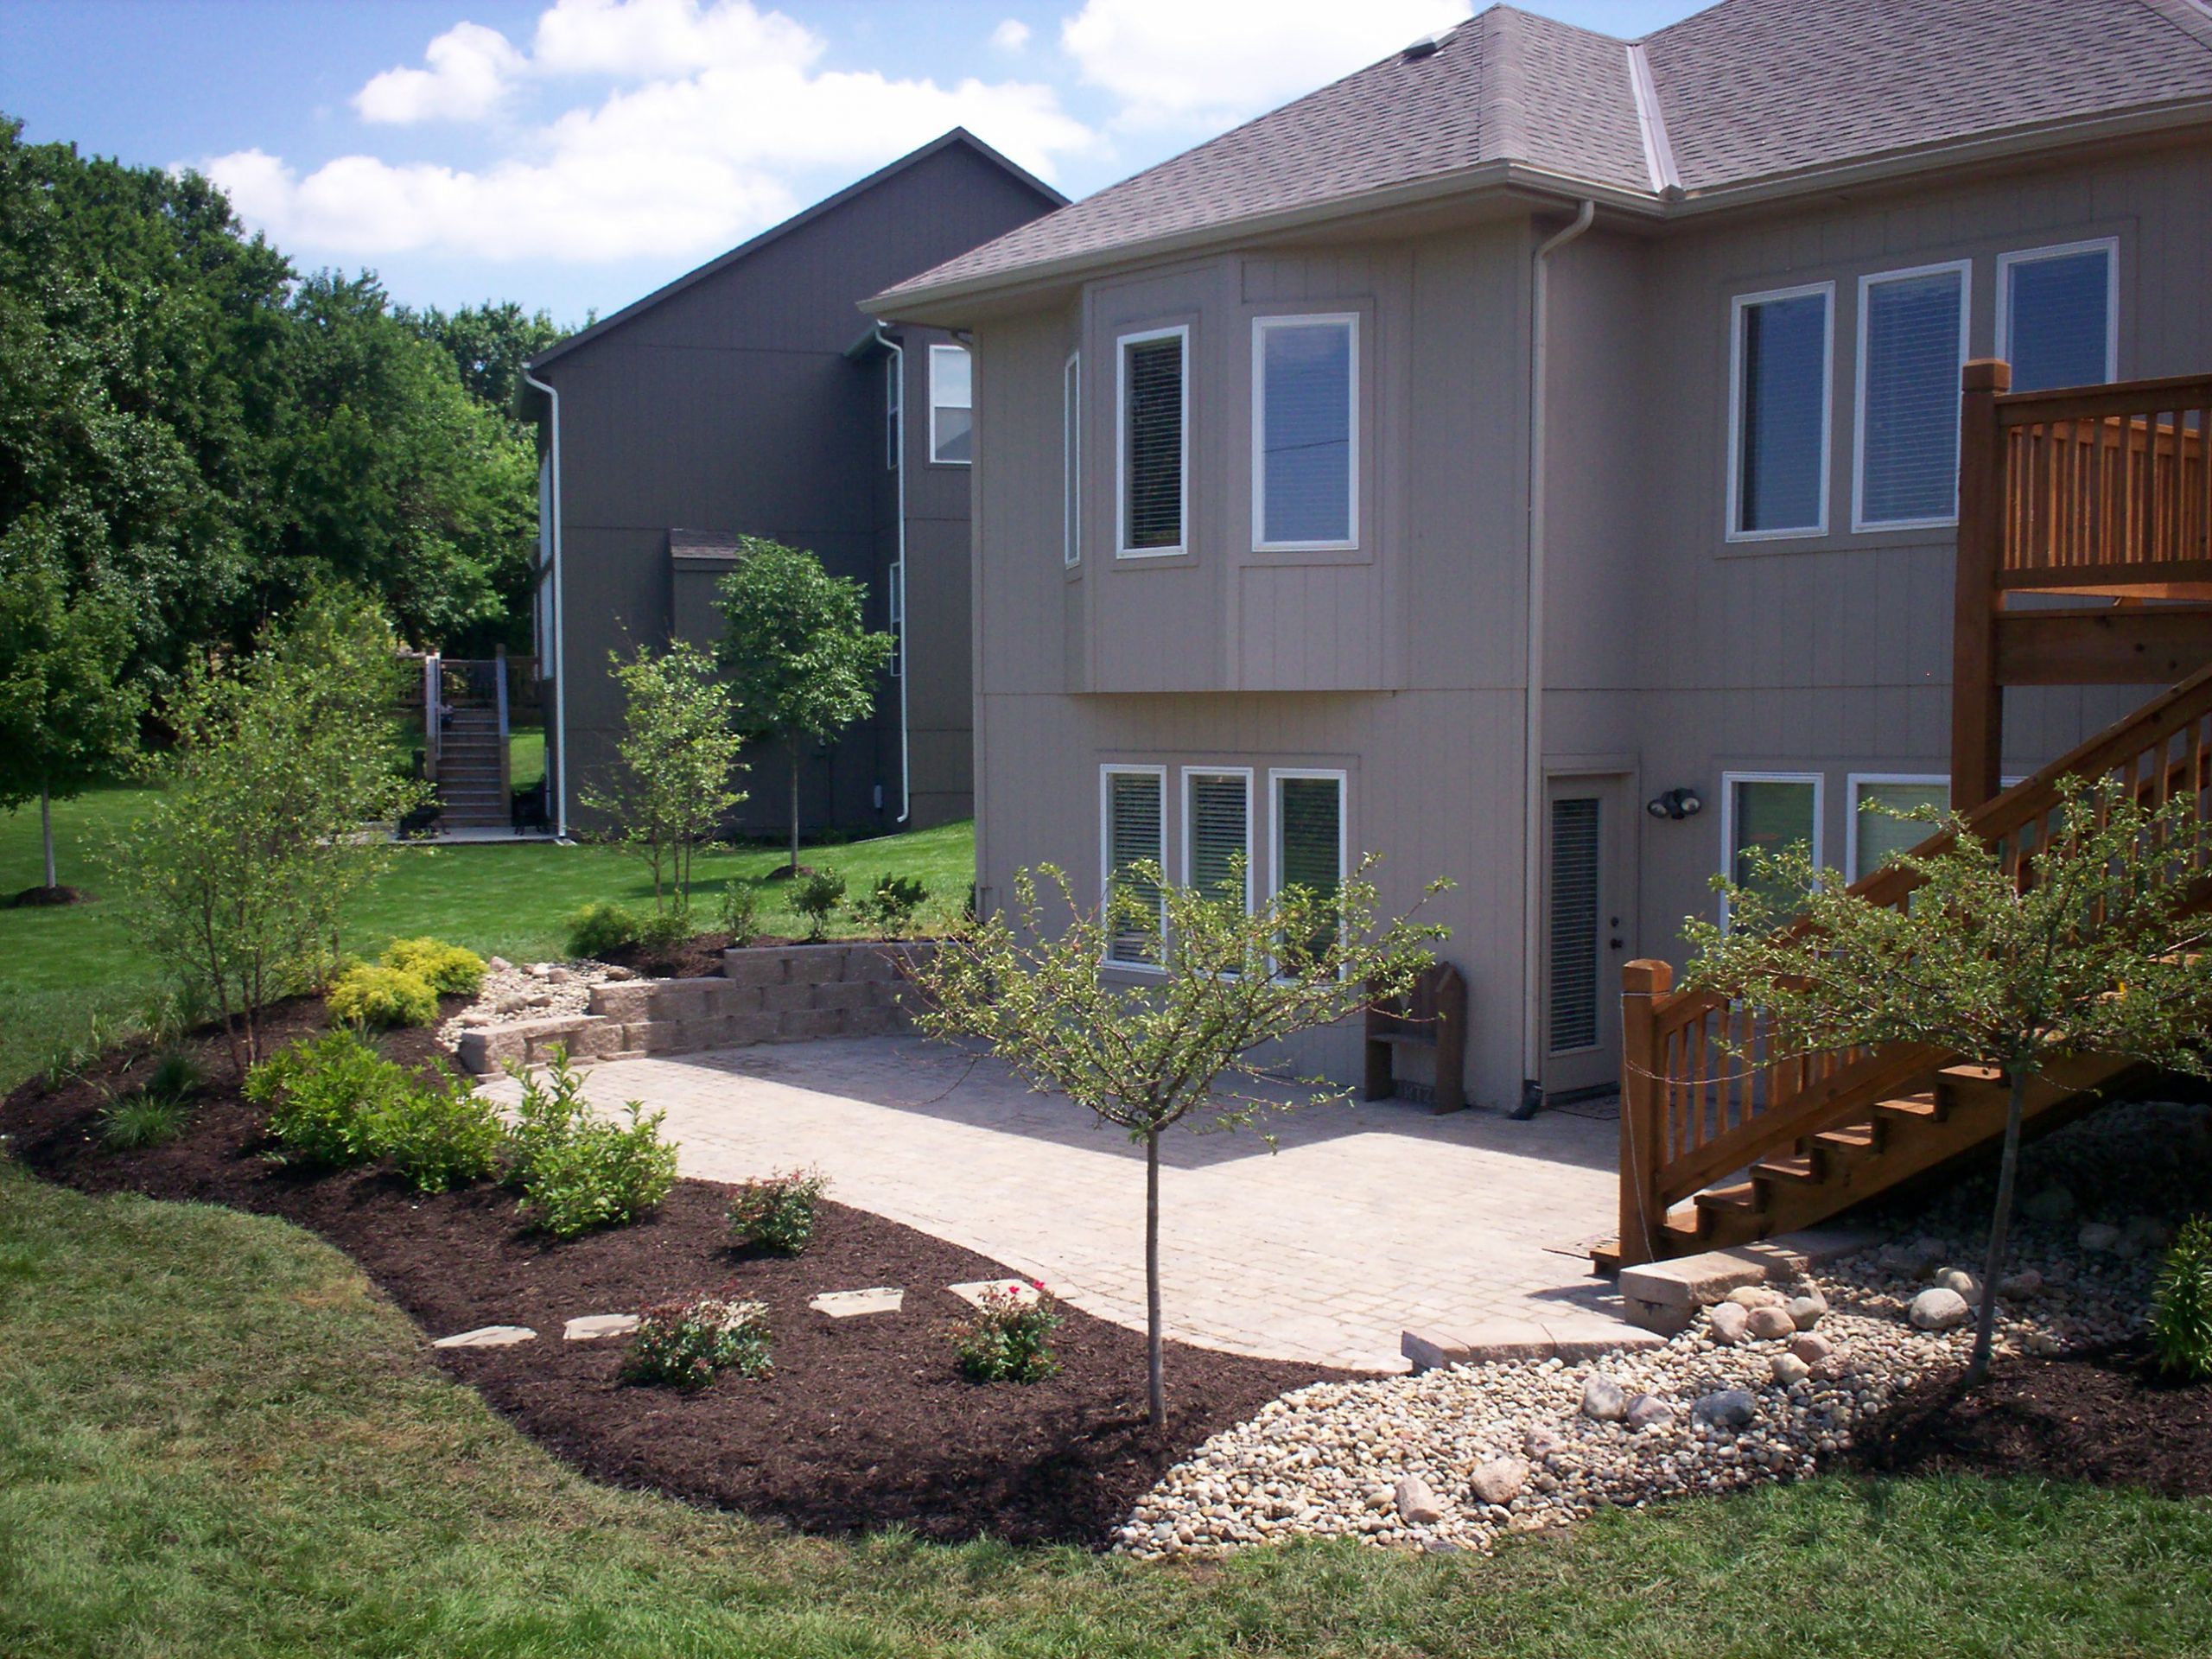 Landscaping Around Patio Ideas
 Patios and Retaining Walls